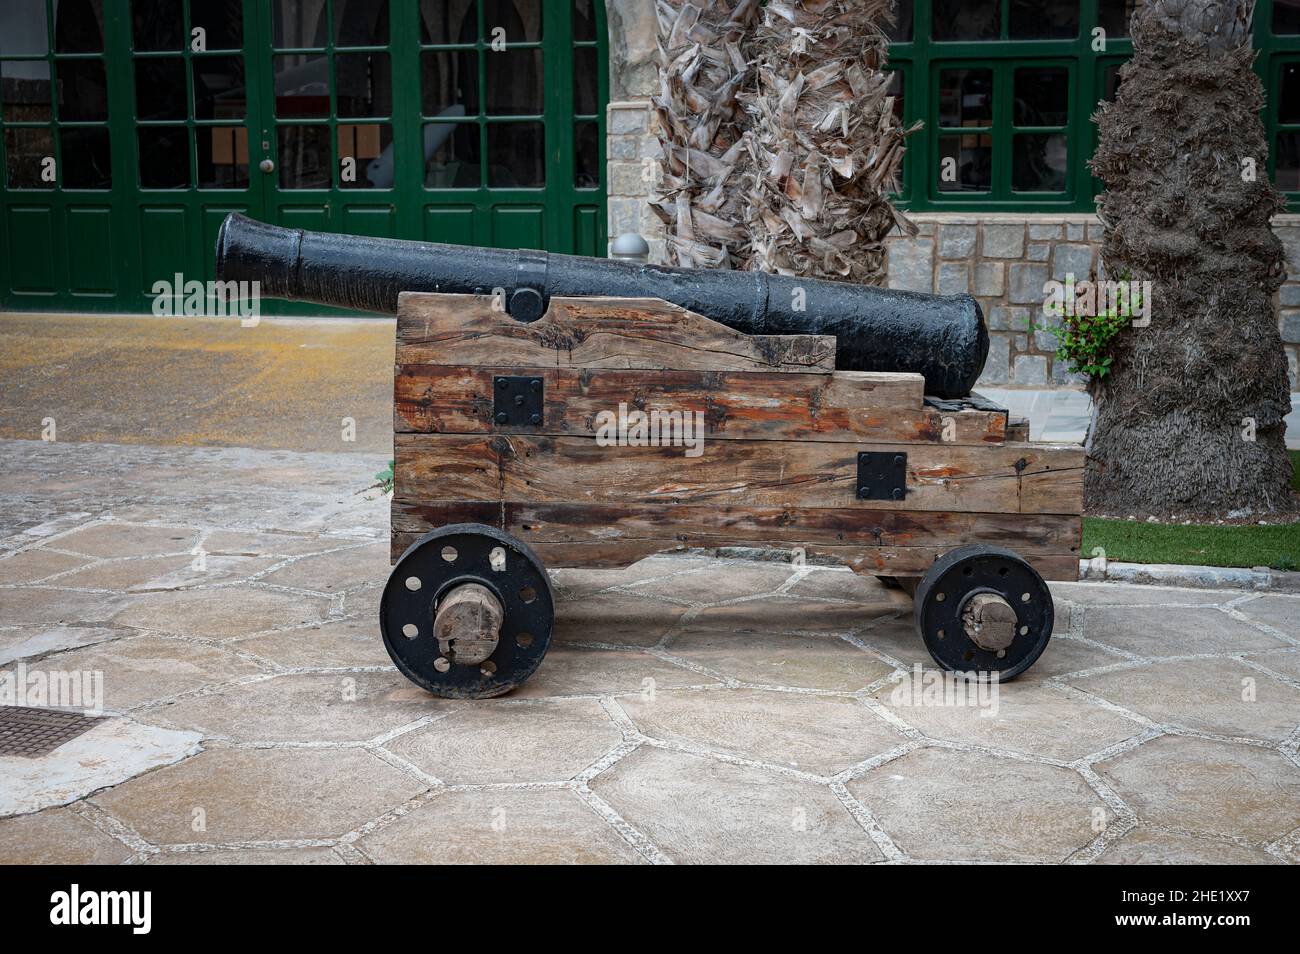 Old defense cannon. The barrel support is made of wood with wheels Stock Photo